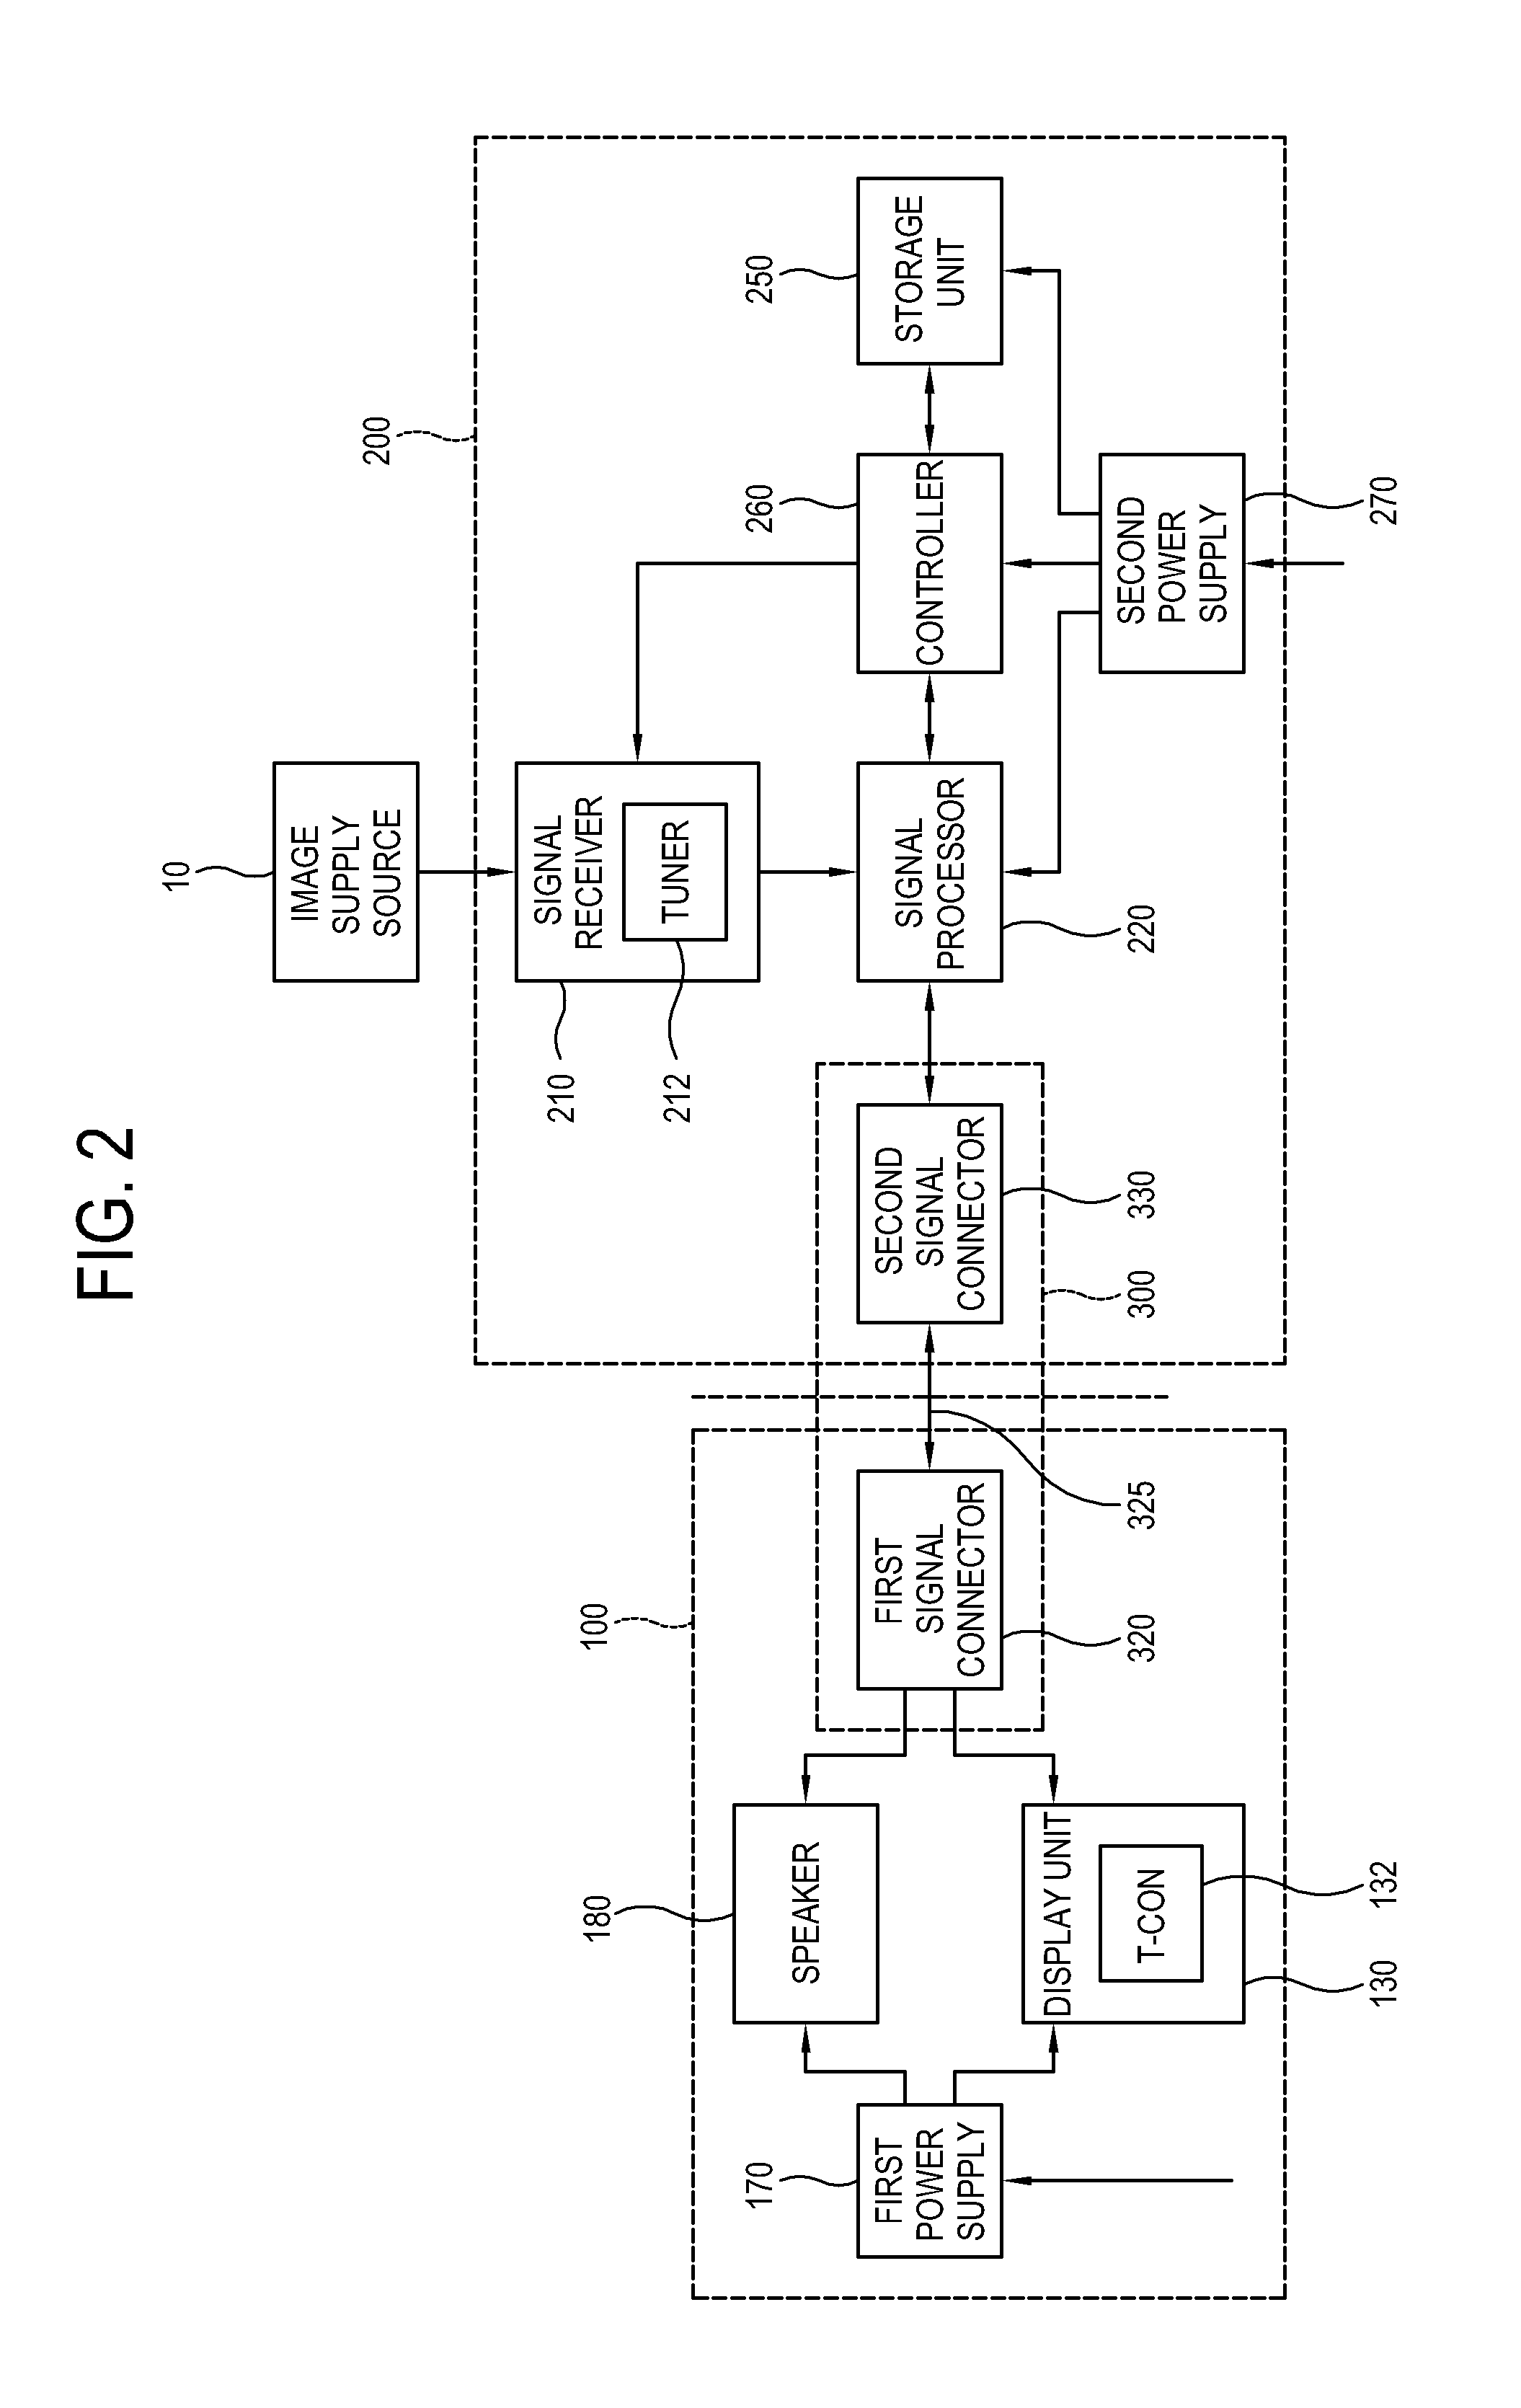 Display apparatus and signal processing module for receiving broadcasting and device and method for receiving broadcasting